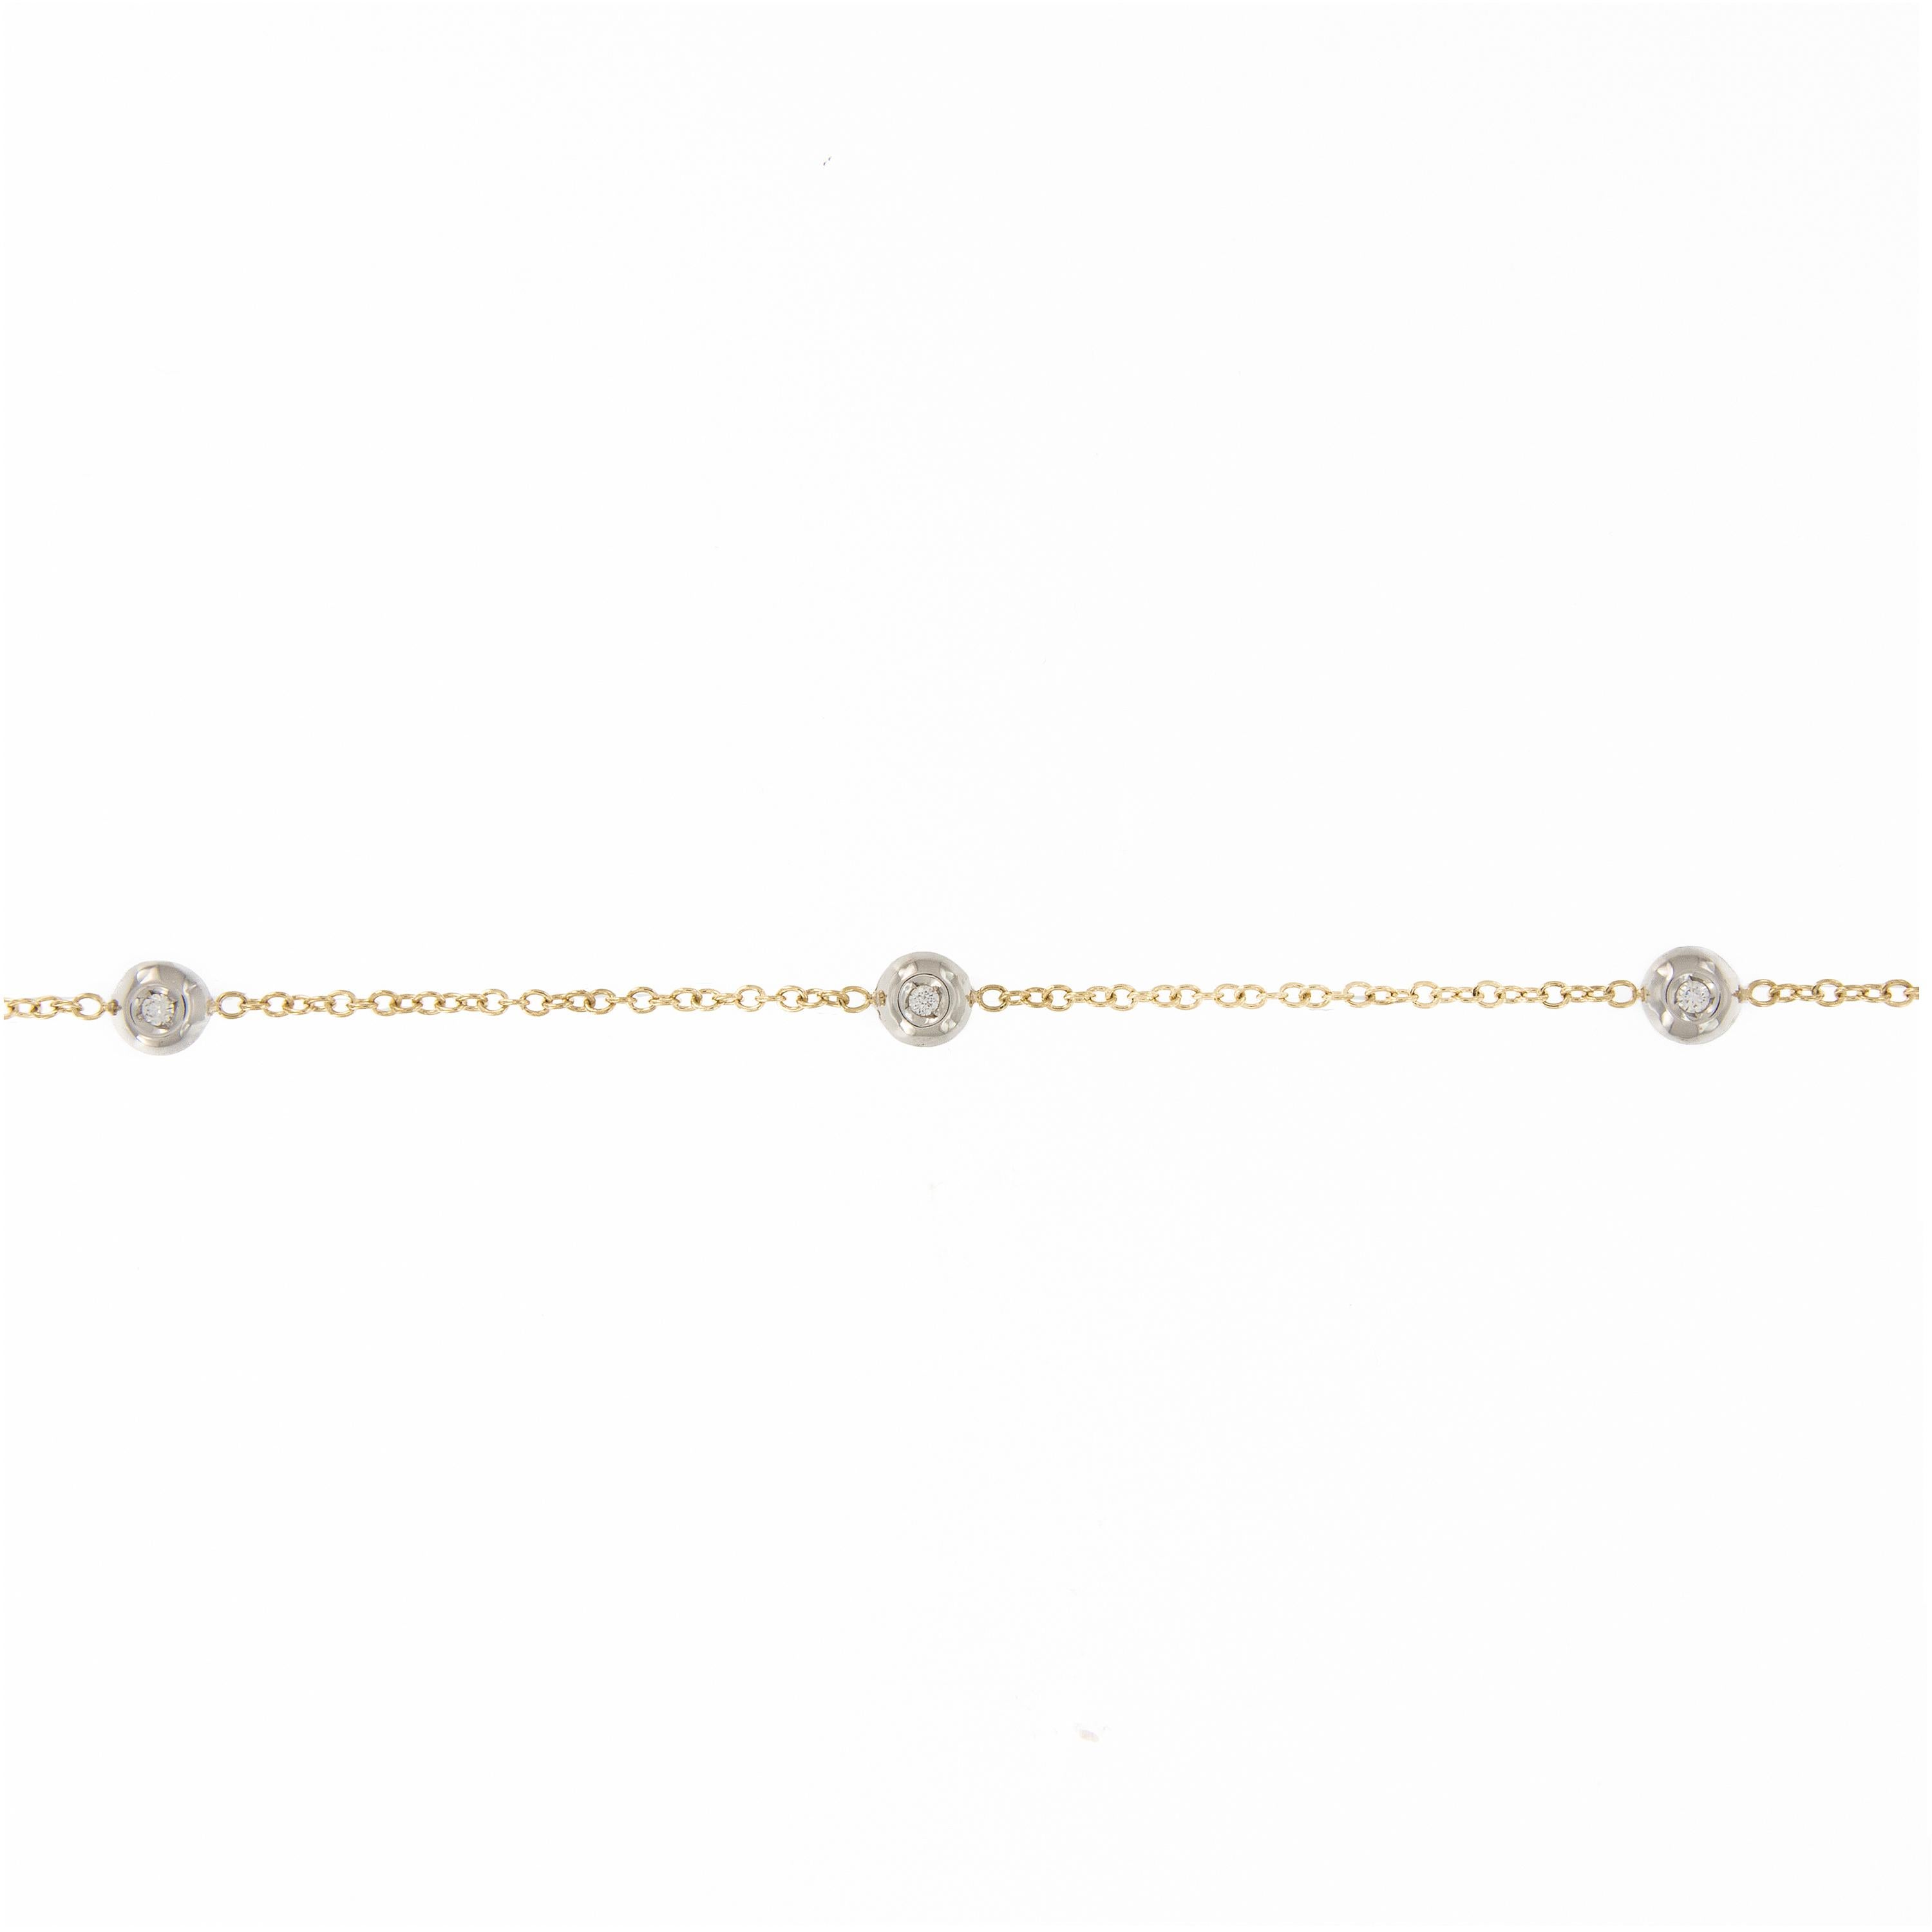 Classic and perfect for everyday! Diamonds by the yard necklace features 20 diamonds bezel set in 18k white gold and a 18k yellow gold chain. Please note the diamonds are on both sides. Measures 18 inches long. Weighs 7 grams.

Diamond 0.44 ct